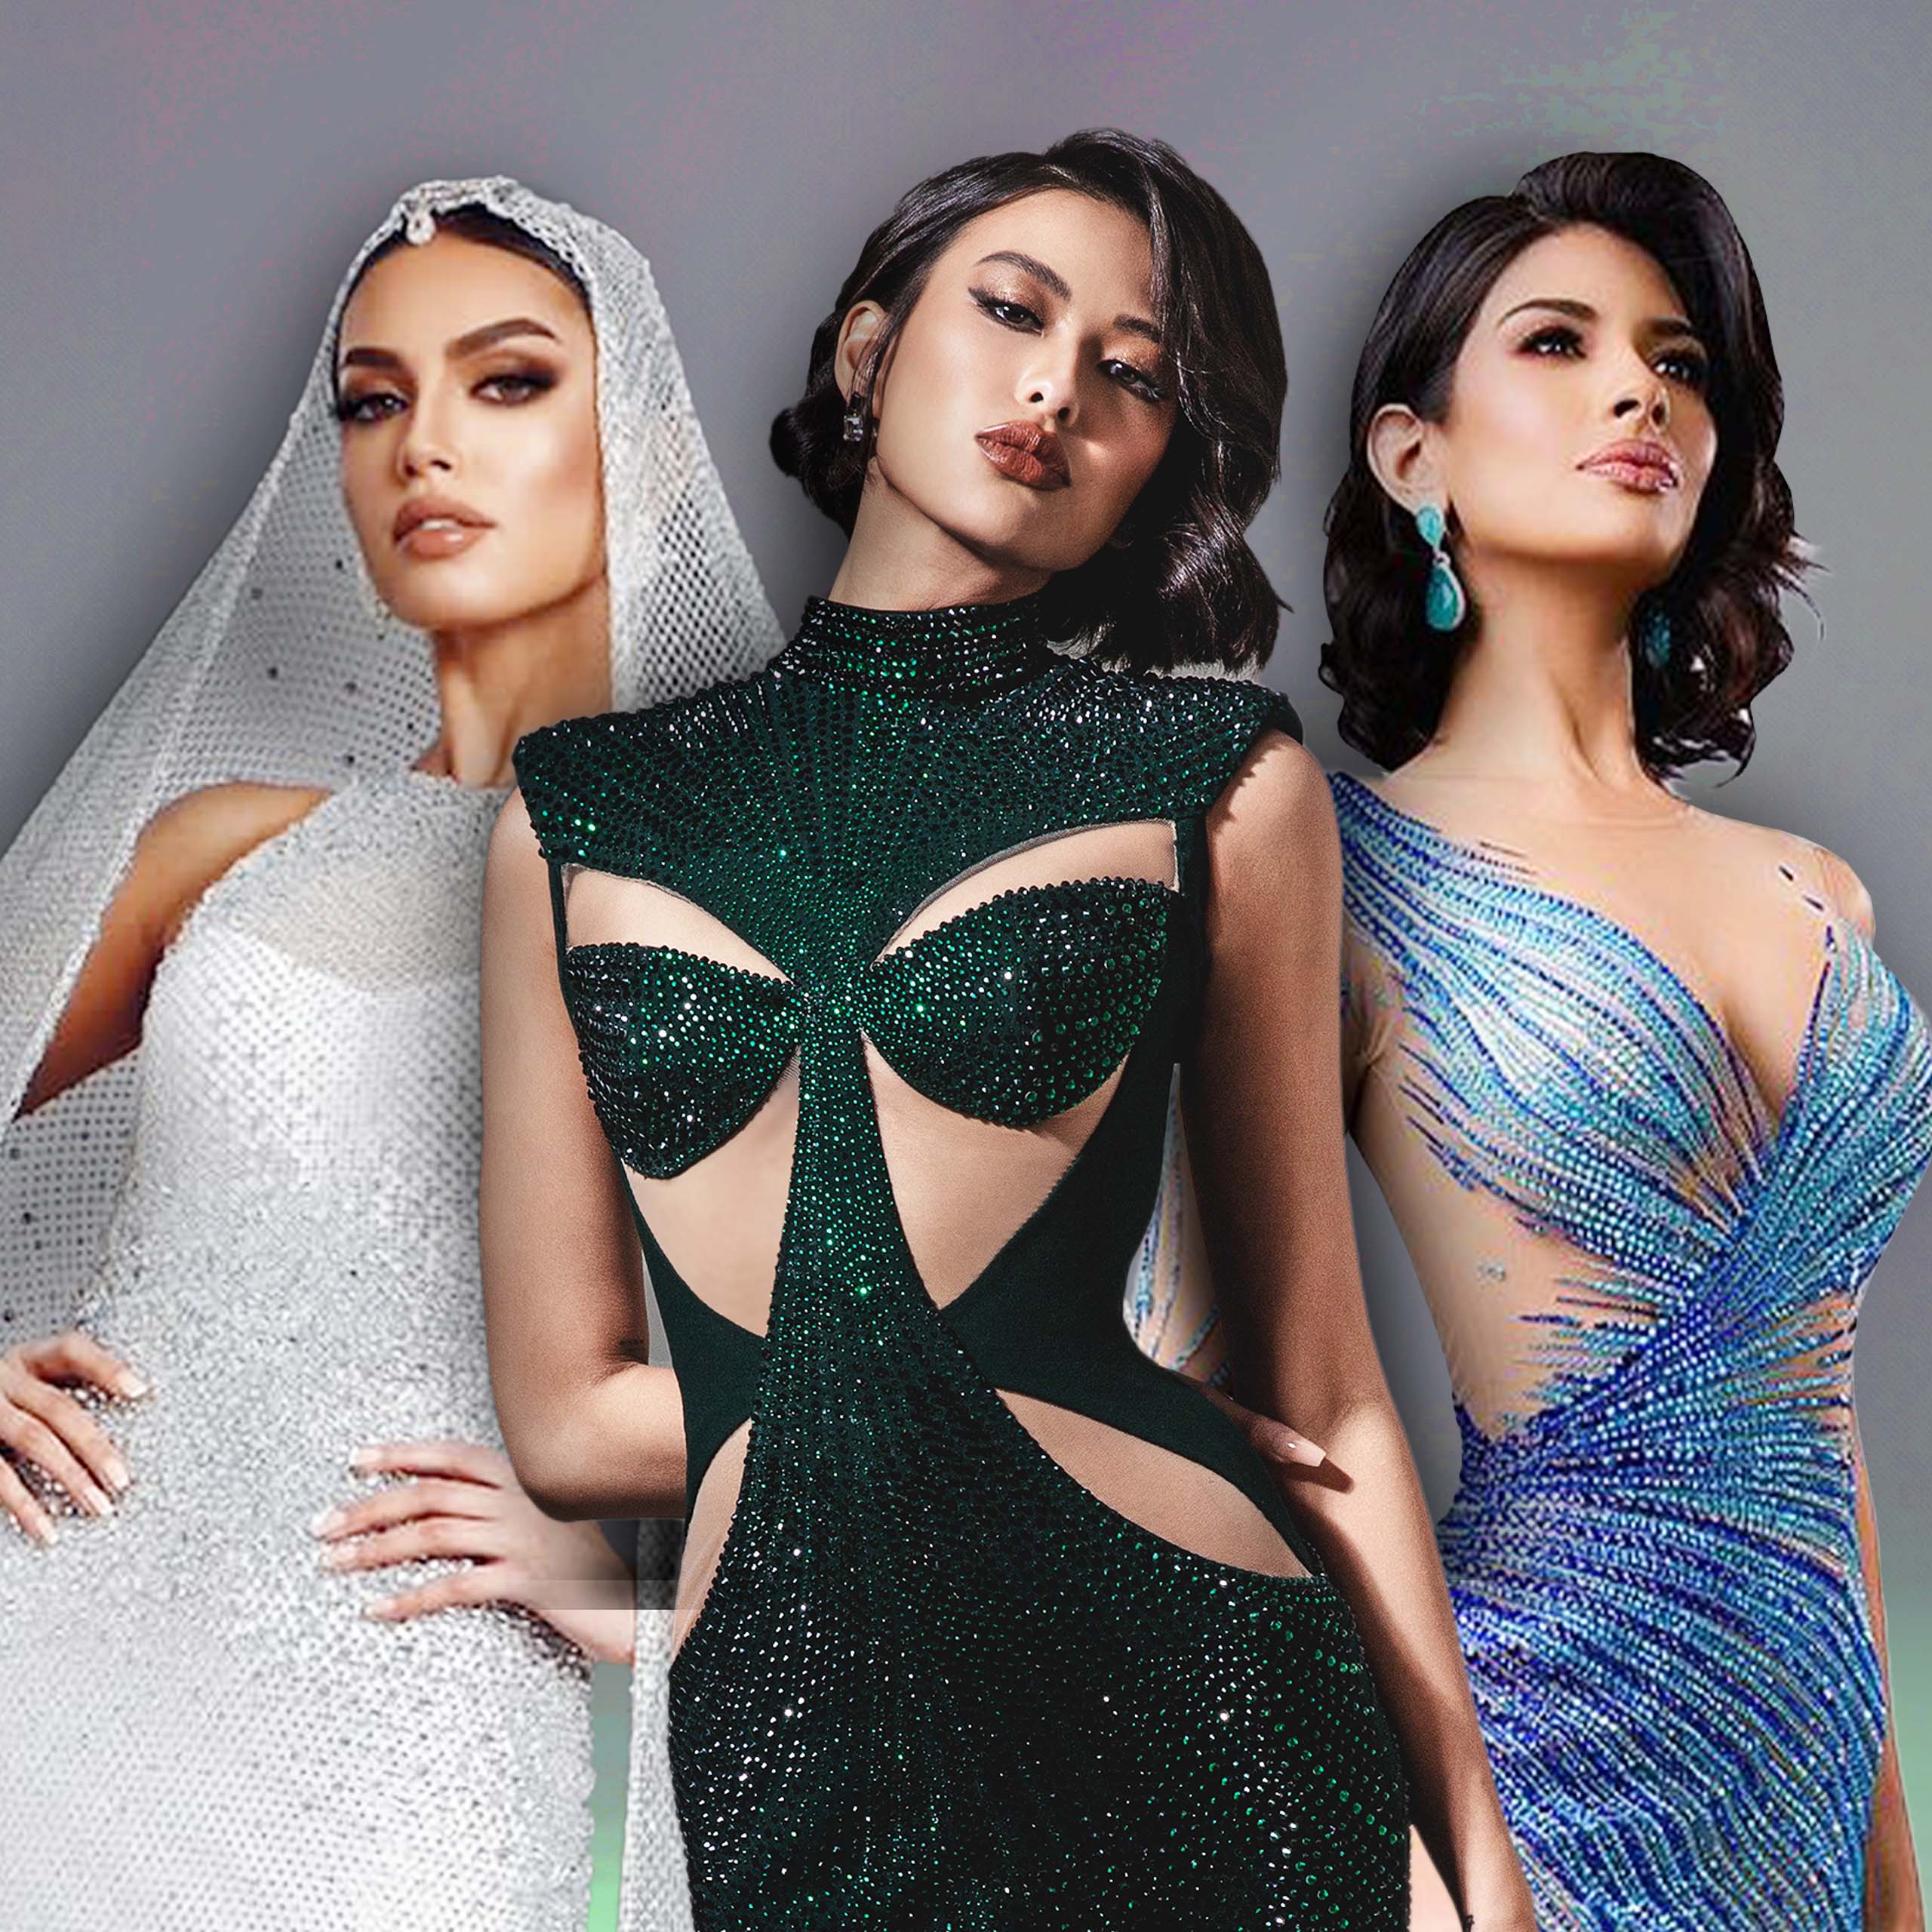 MEGA's Top Preliminary Evening Gowns For Miss Universe 2023